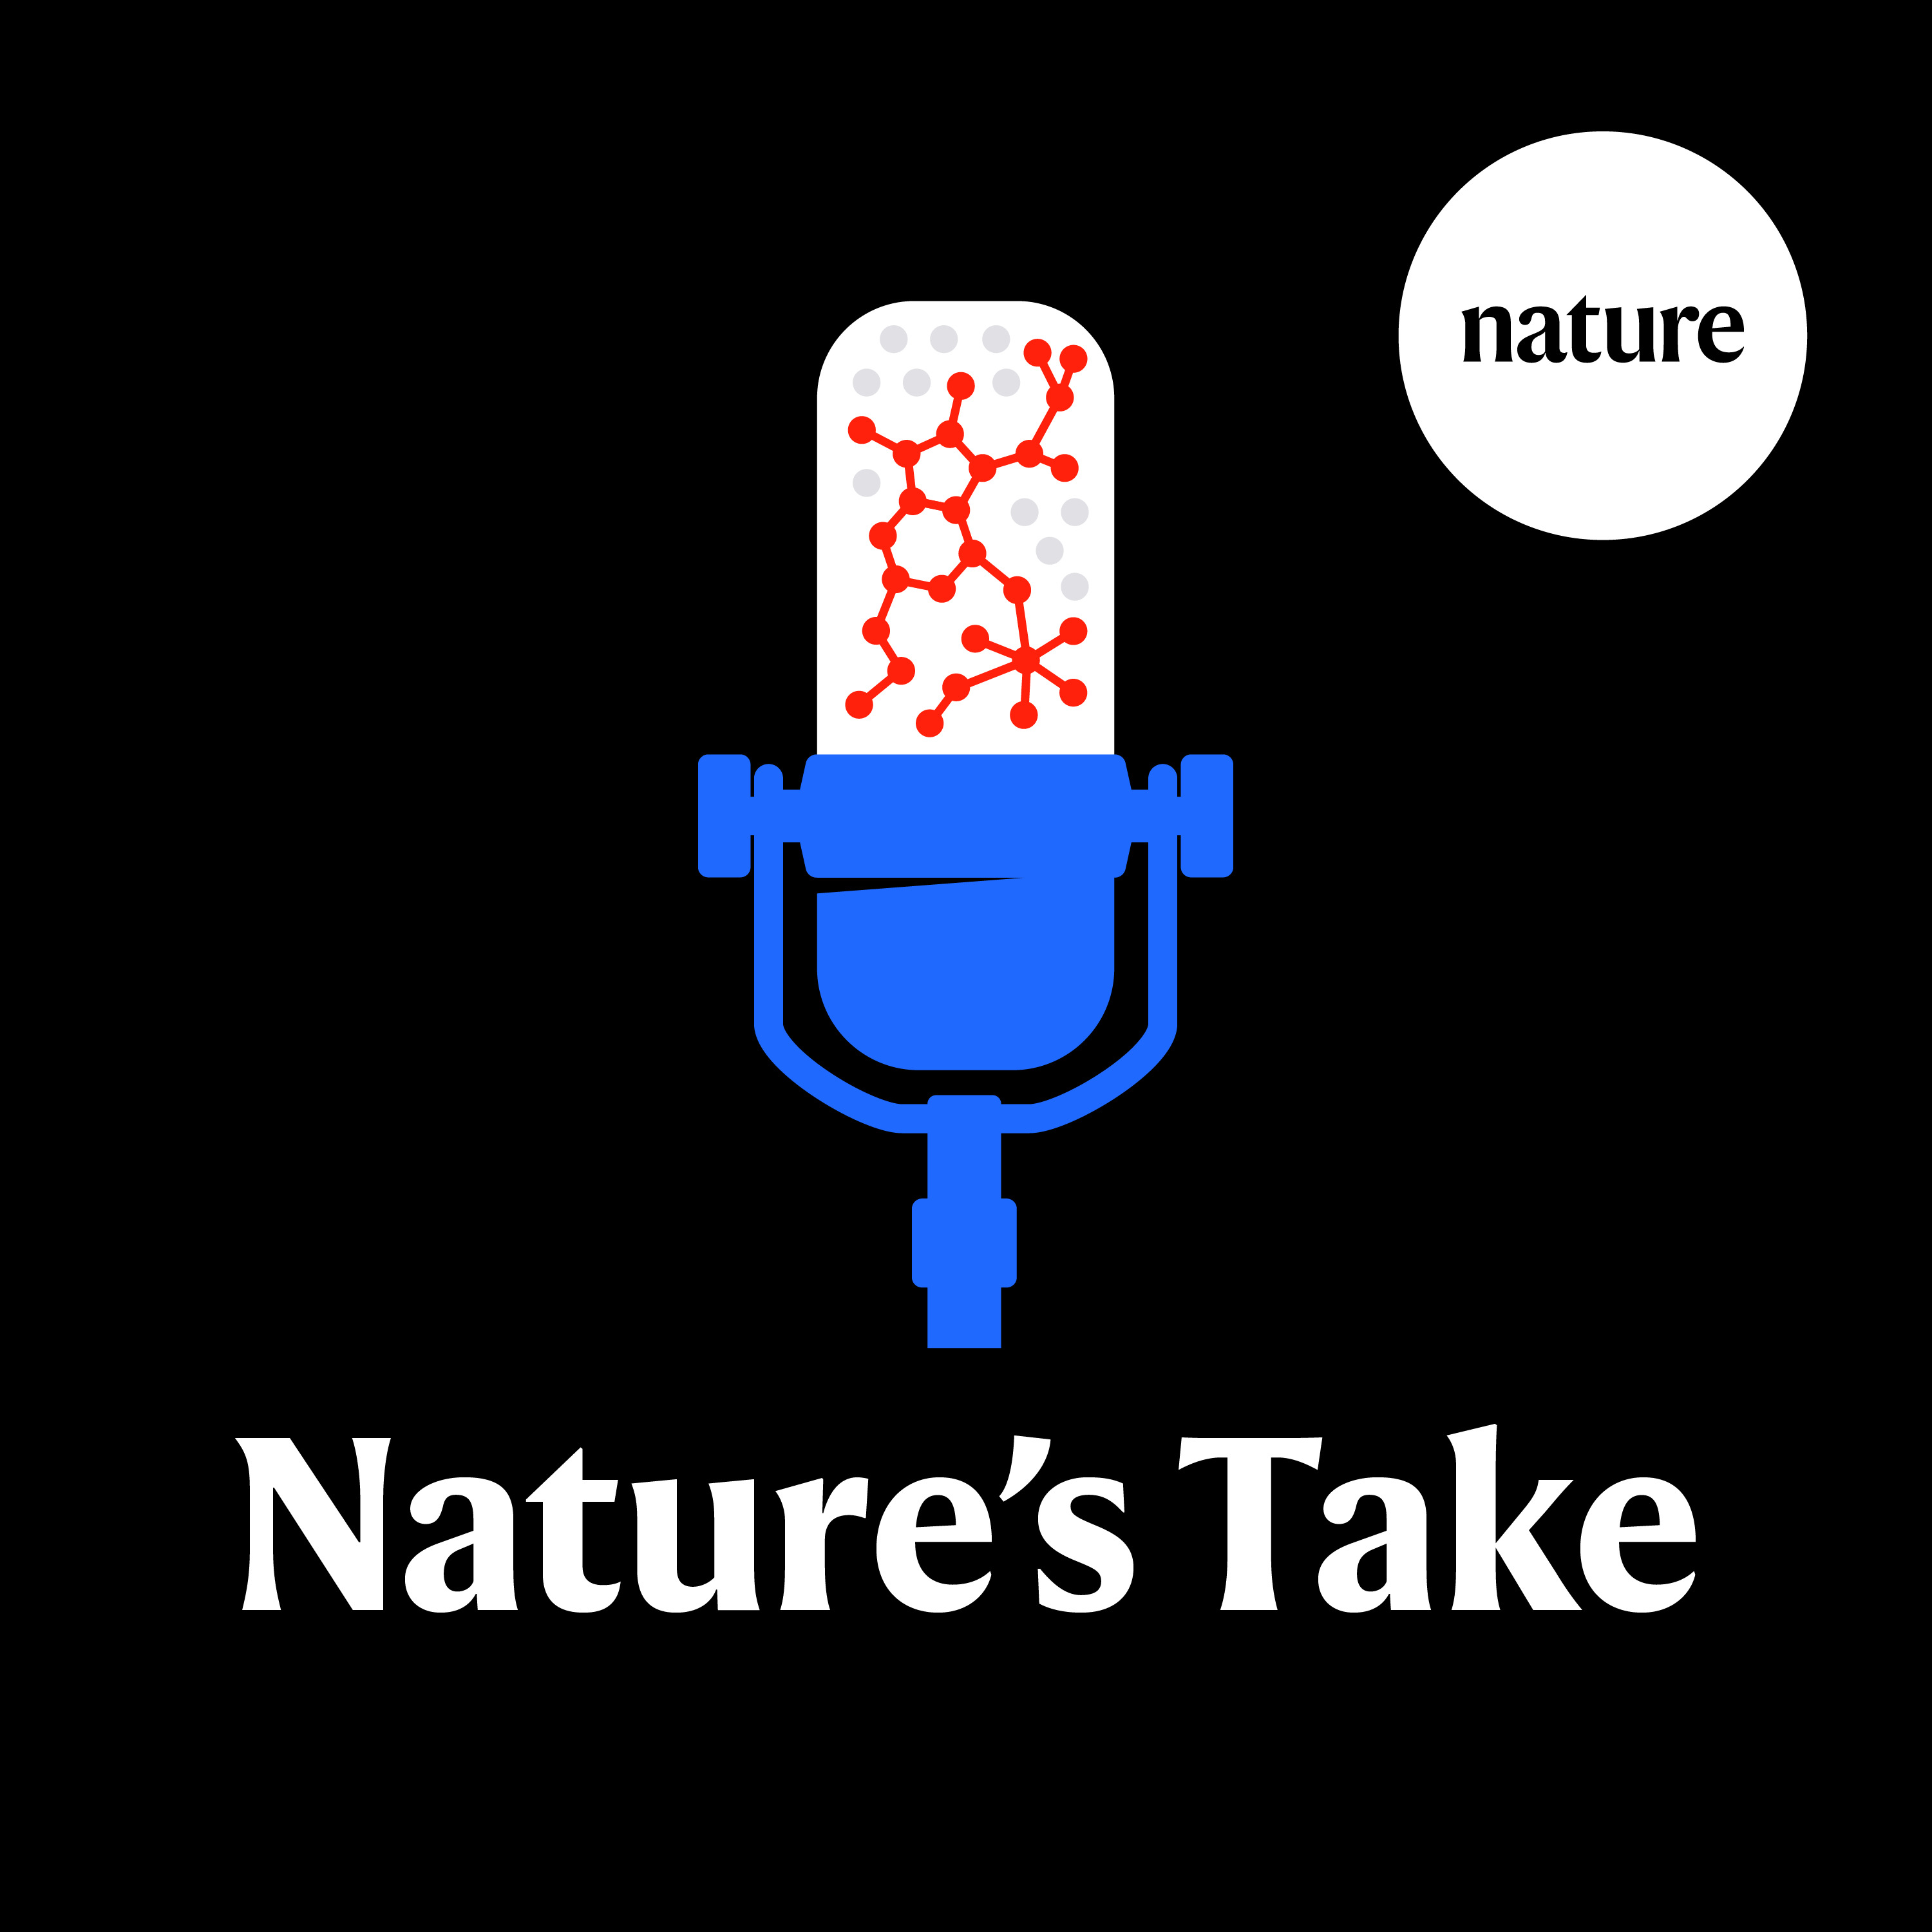 Nature’s Take: How the war in Ukraine is impacting science